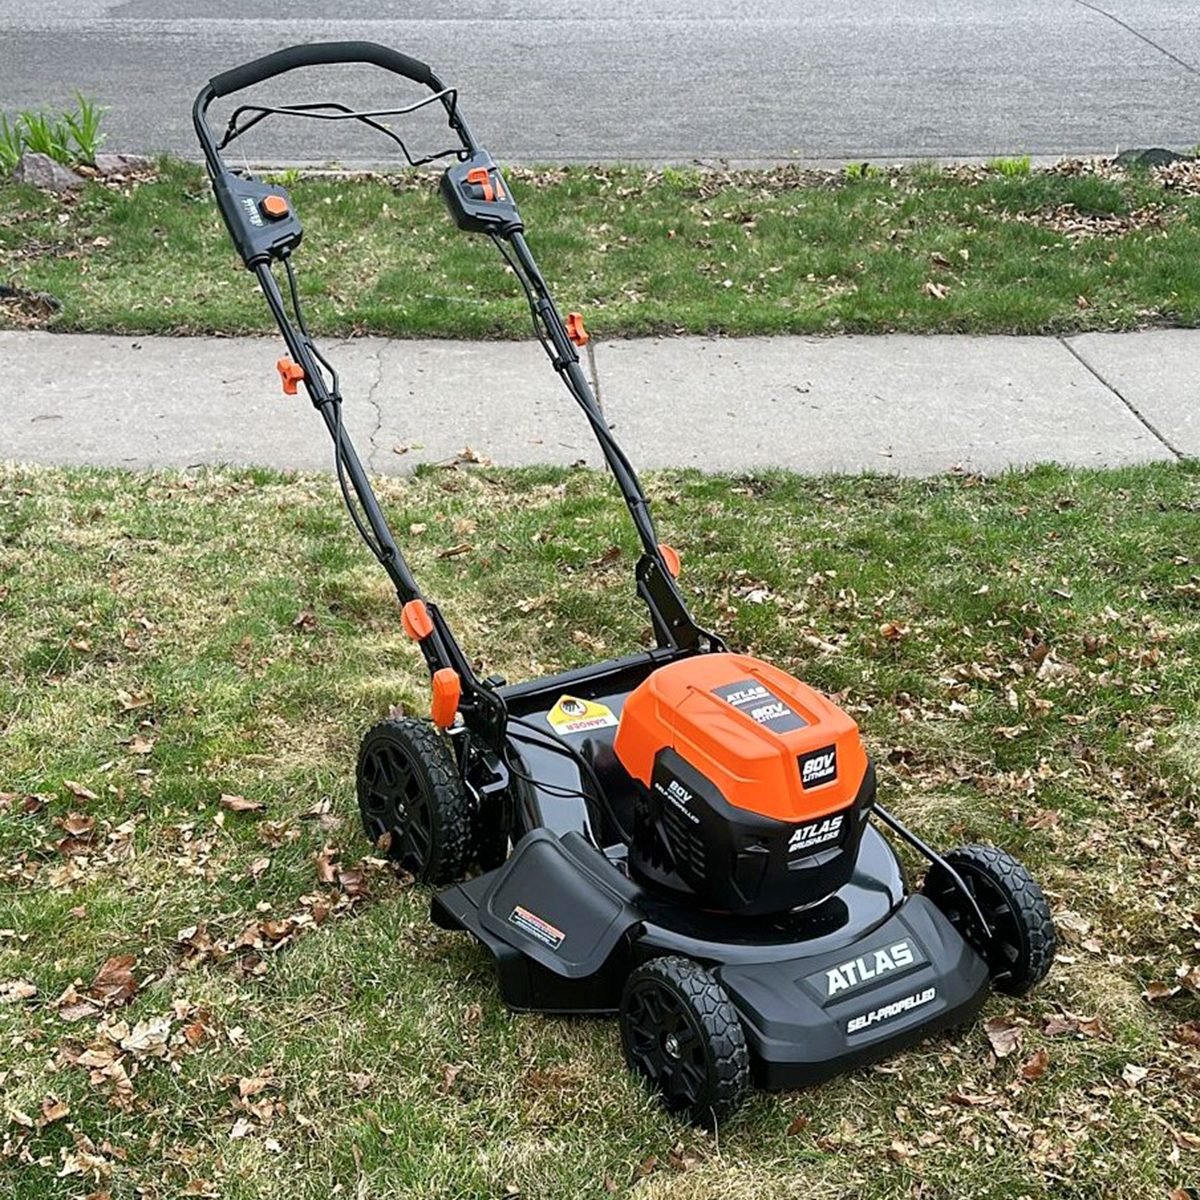 Atlas Lawn Mower Review: A Welcome Addition to Your Lawn-Tool Collection